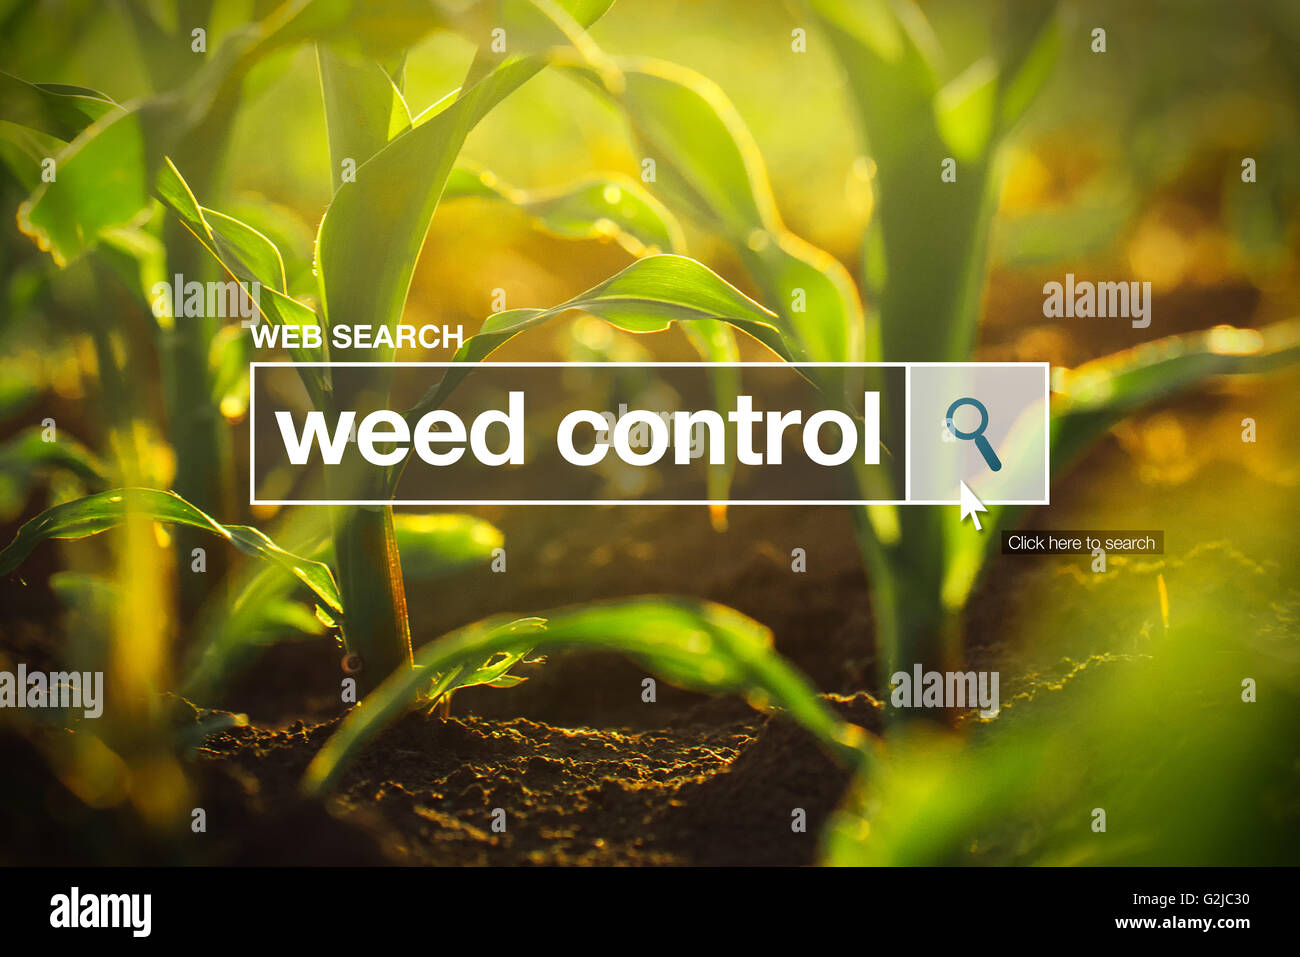 Weed control in internet browser search box, maize field in background Stock Photo